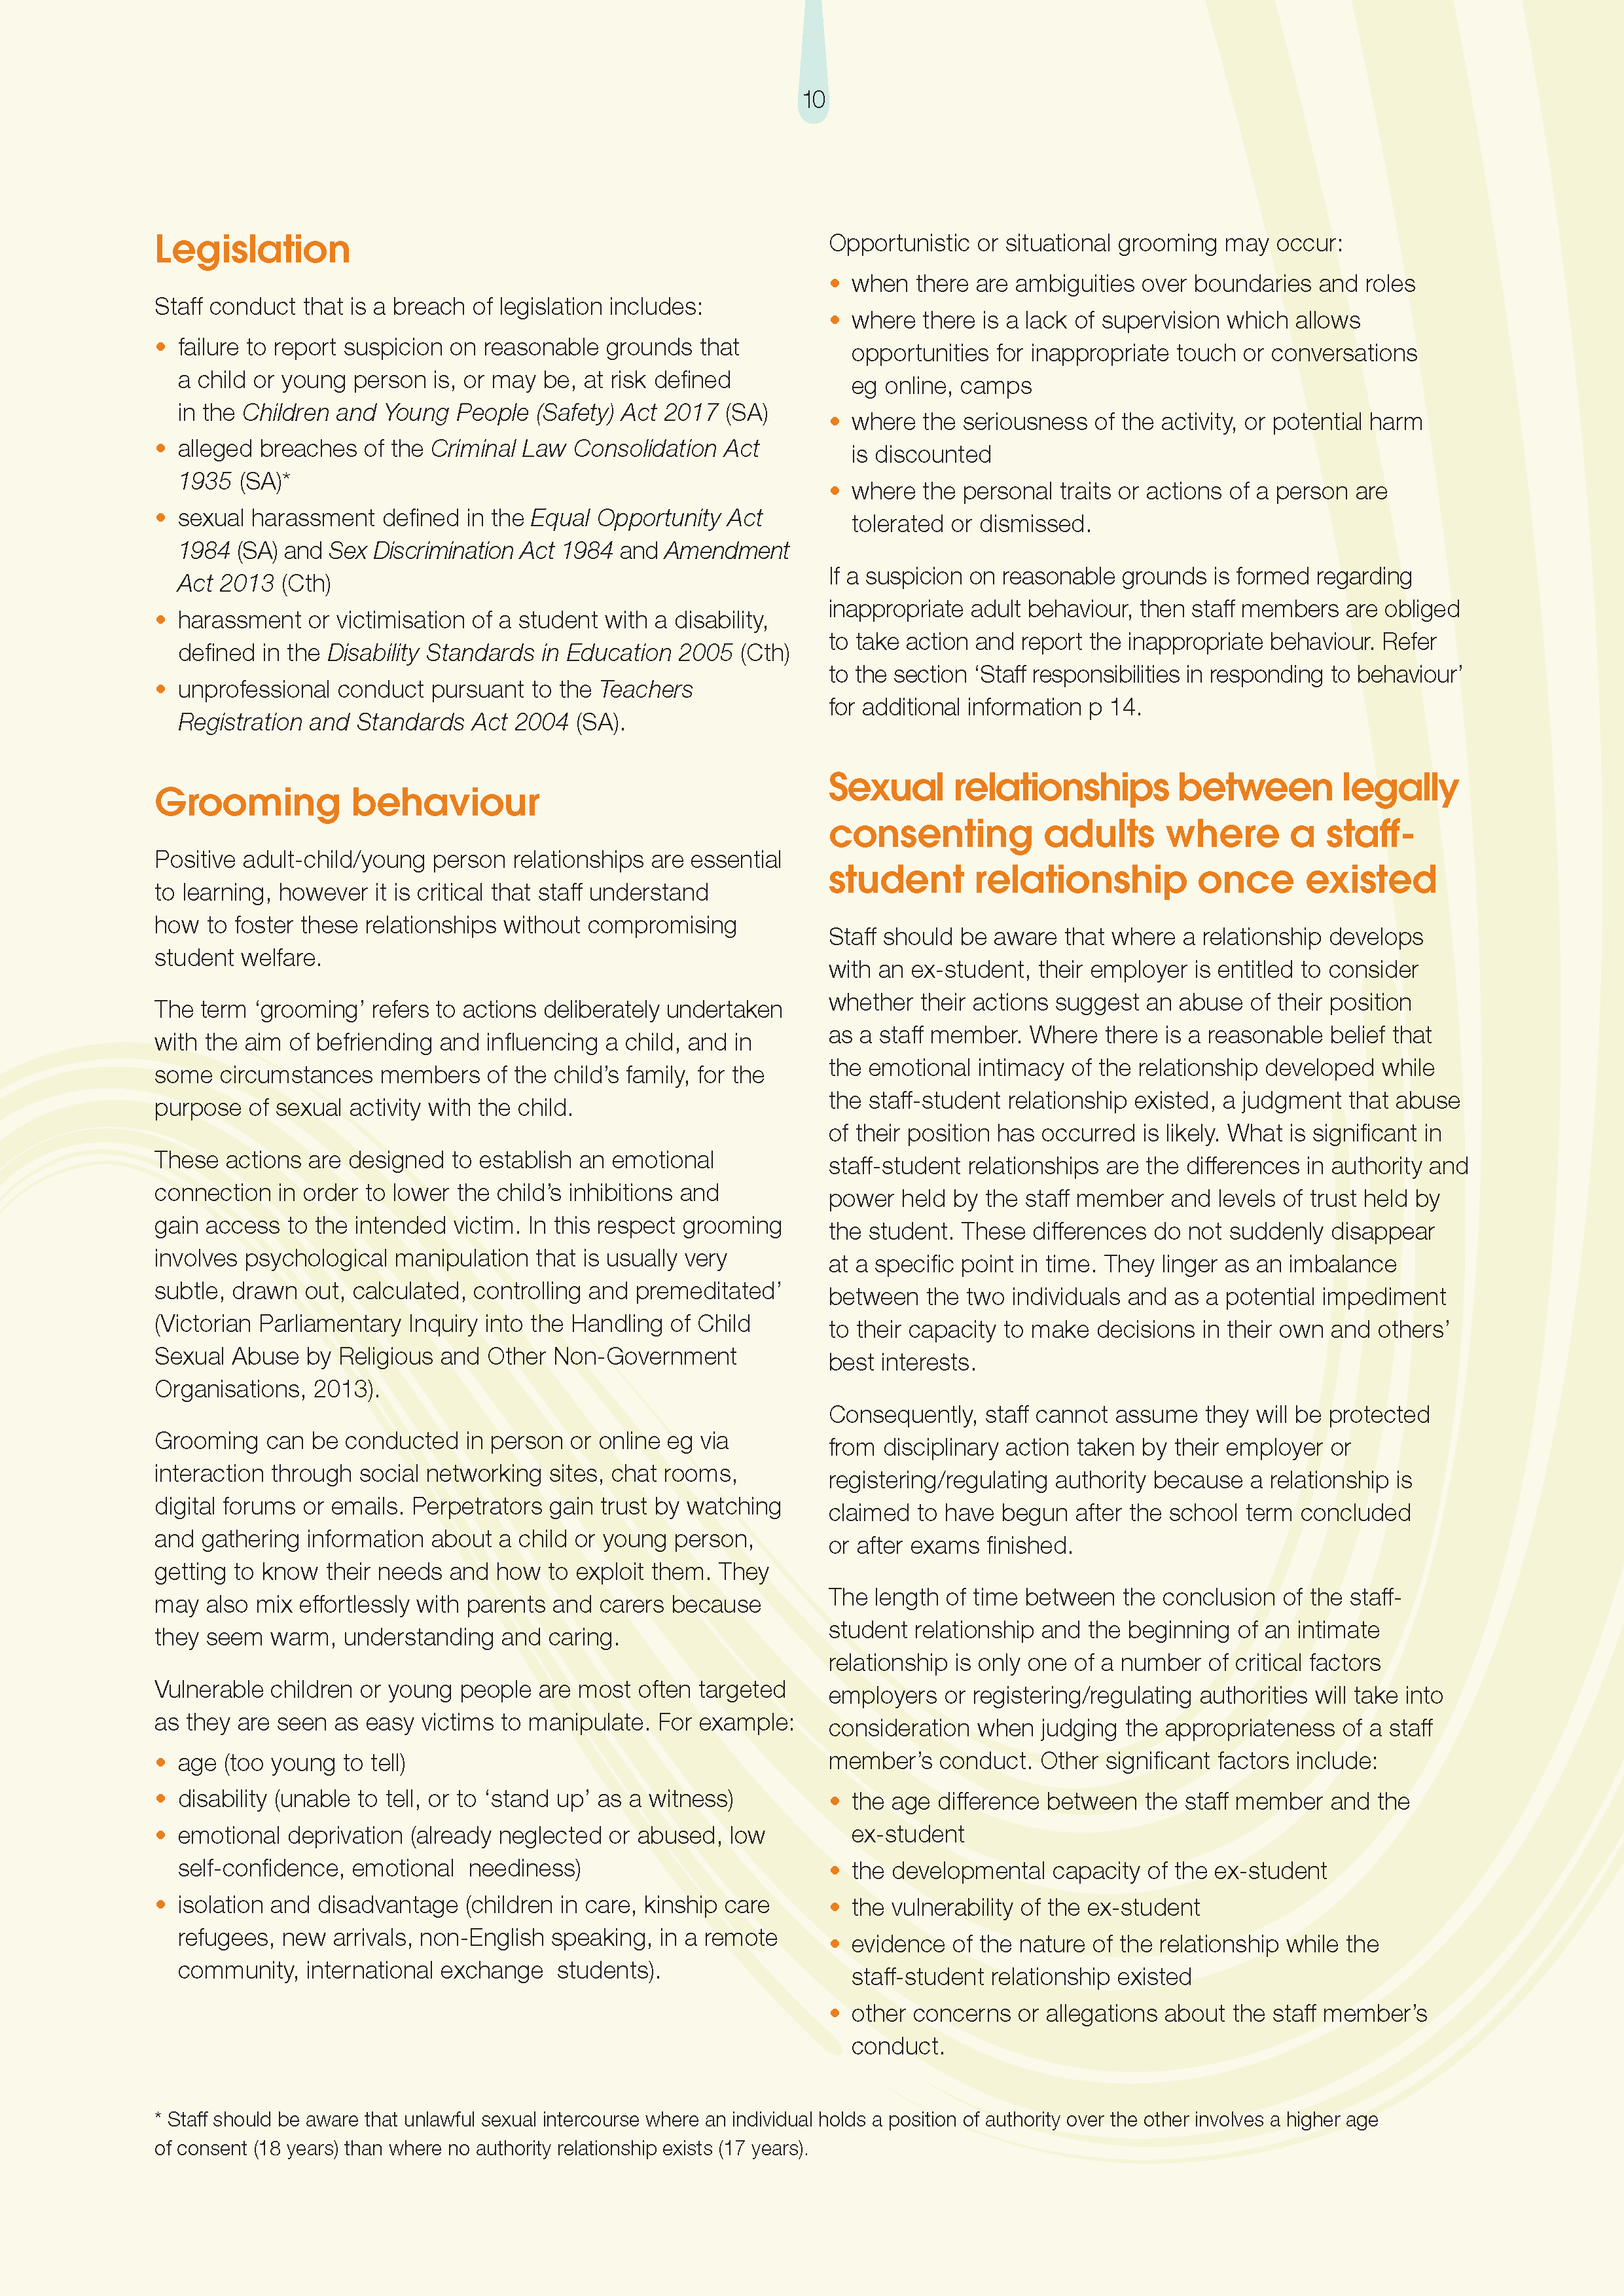 protective_practices_for_staff_in_their_interactions_with_children_and_young_people 2019_Page_13.png